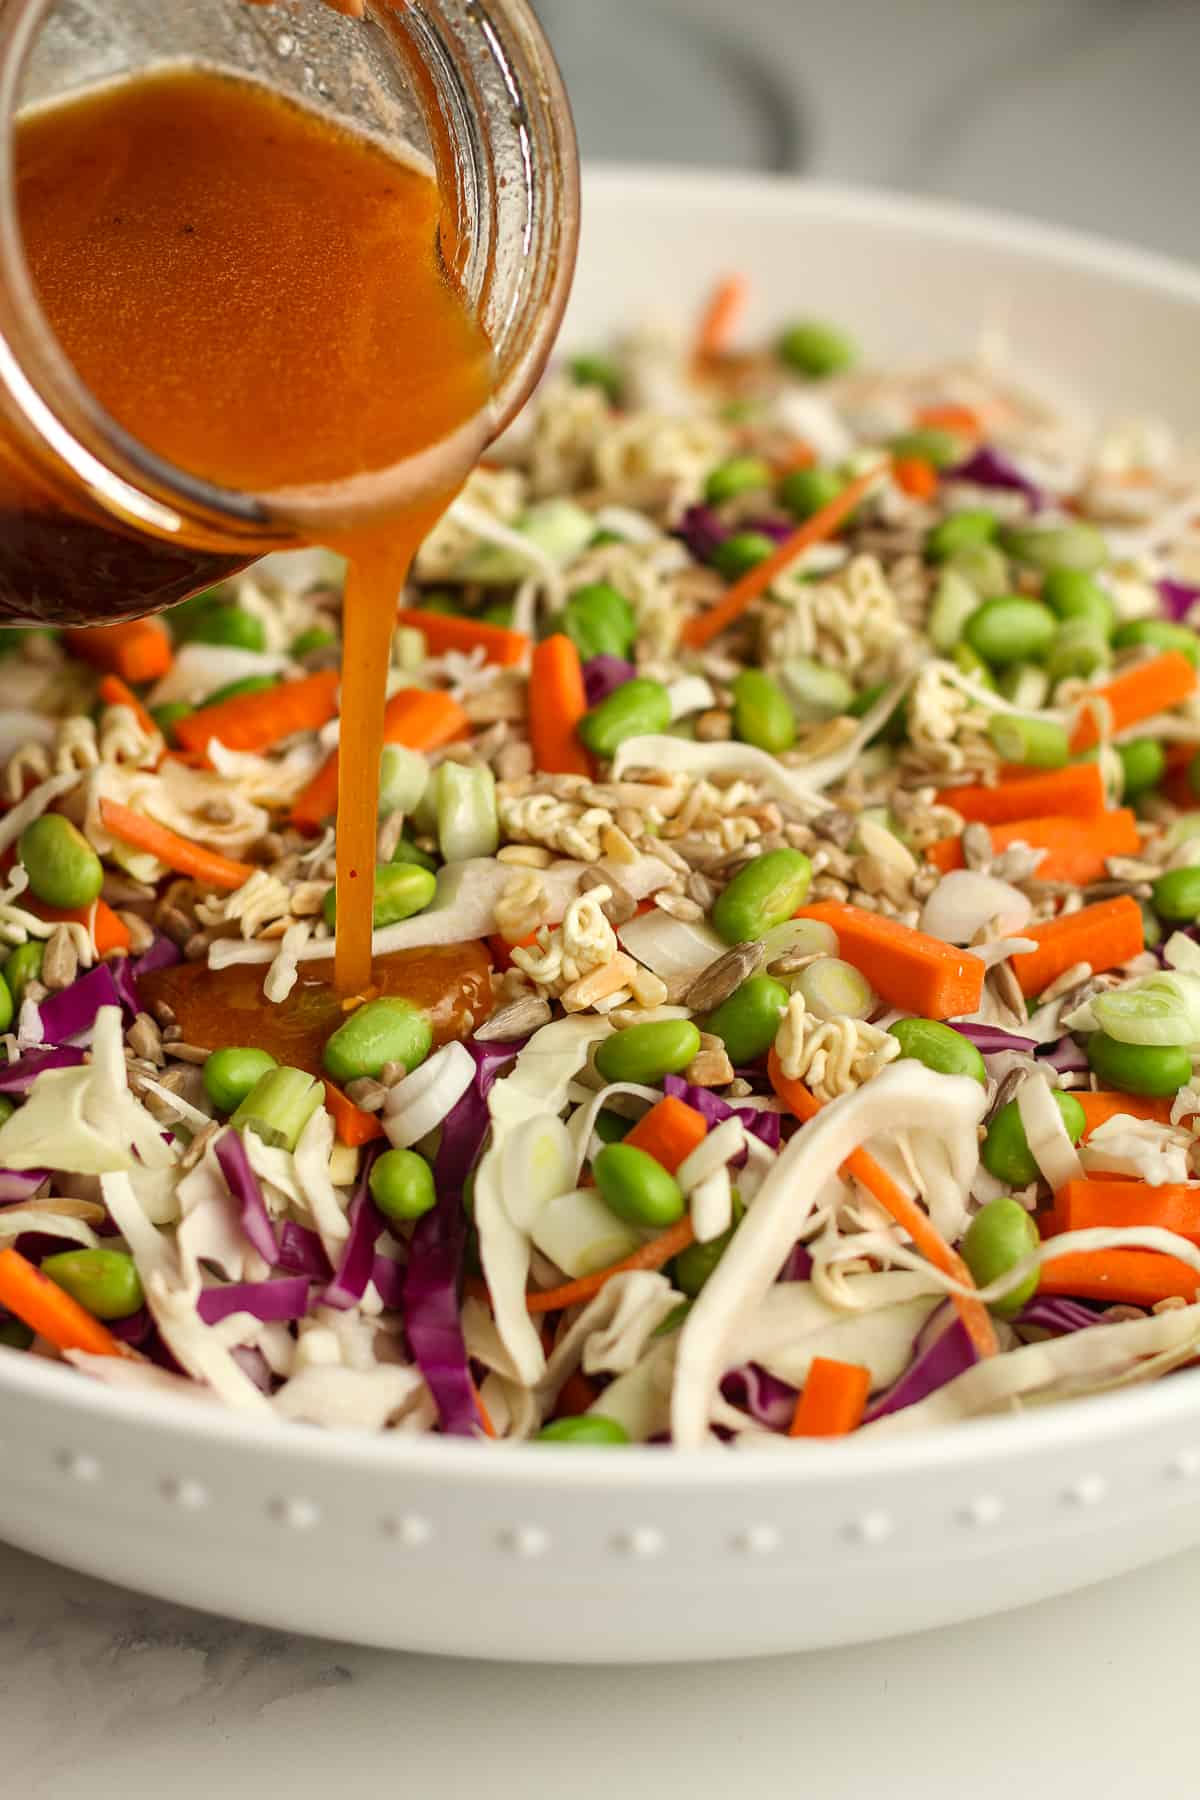 A jar of dressing being poured on the salad.